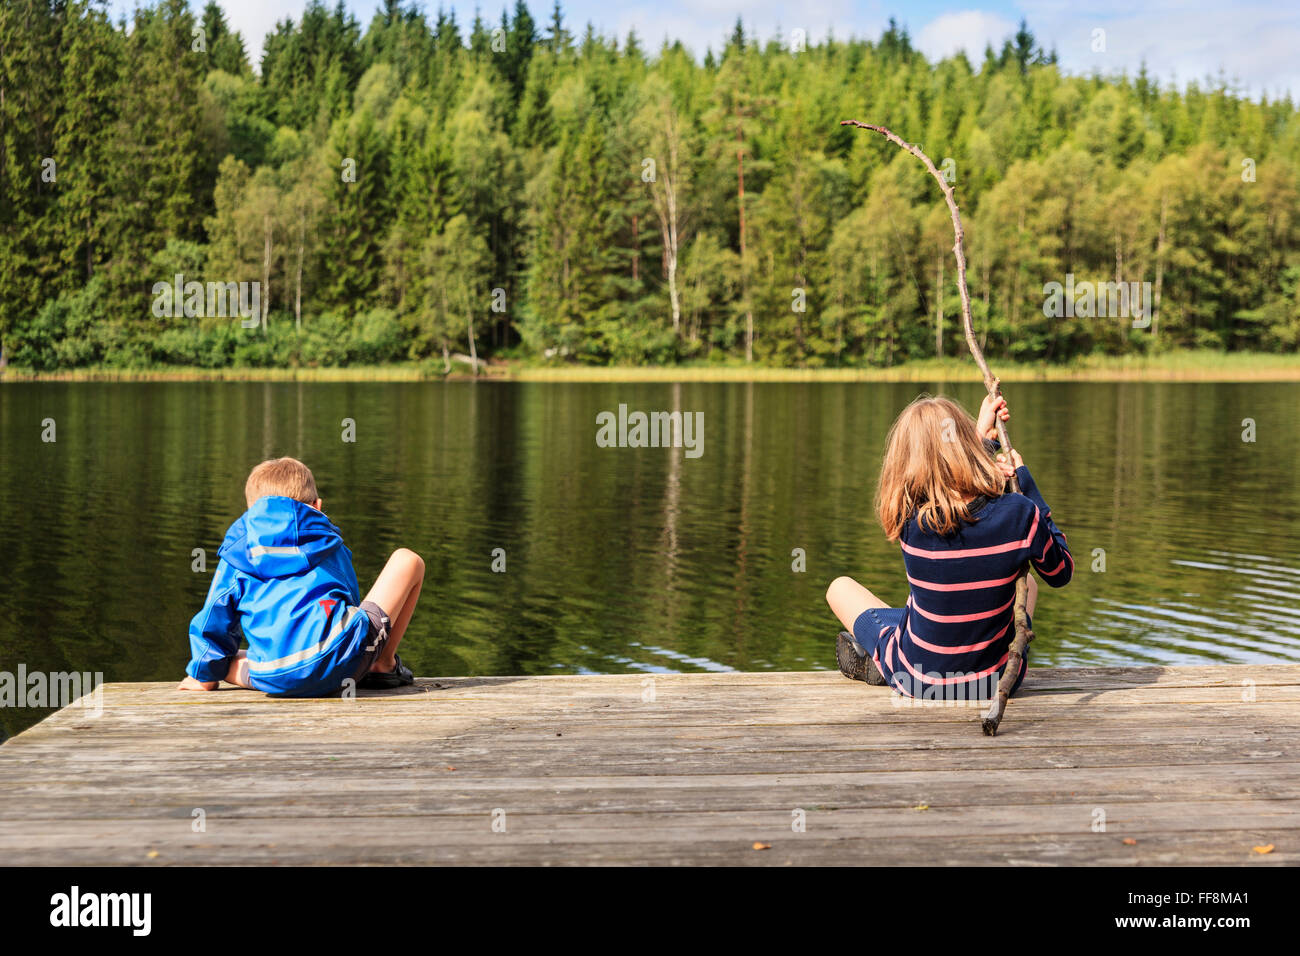 Two children, younger brother and older sister, using a homemade fishing rod fishing from jetty by a lake set in an idyllic Swedish summer forest landscape Stock Photo